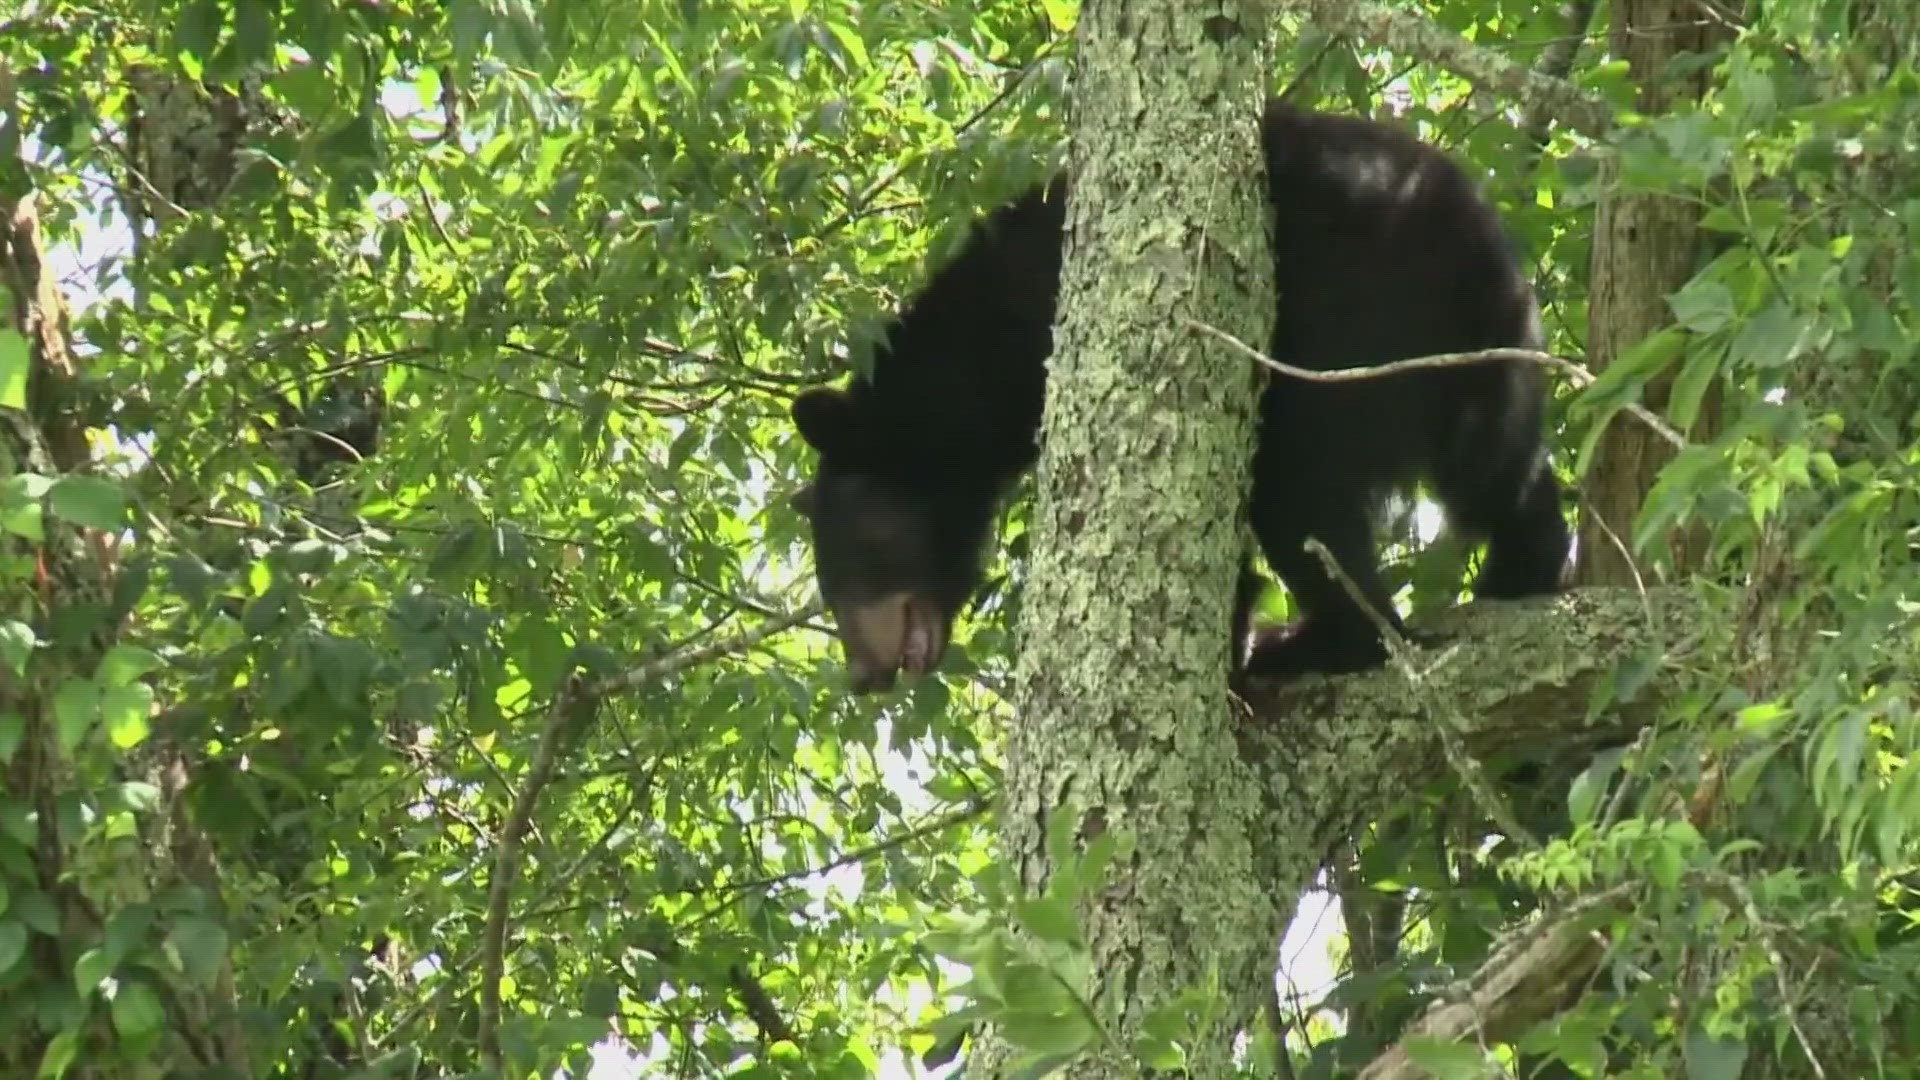 The Tennessee Wildlife Resource Agency reports an 18 percent increase in bear related calls since 2021.